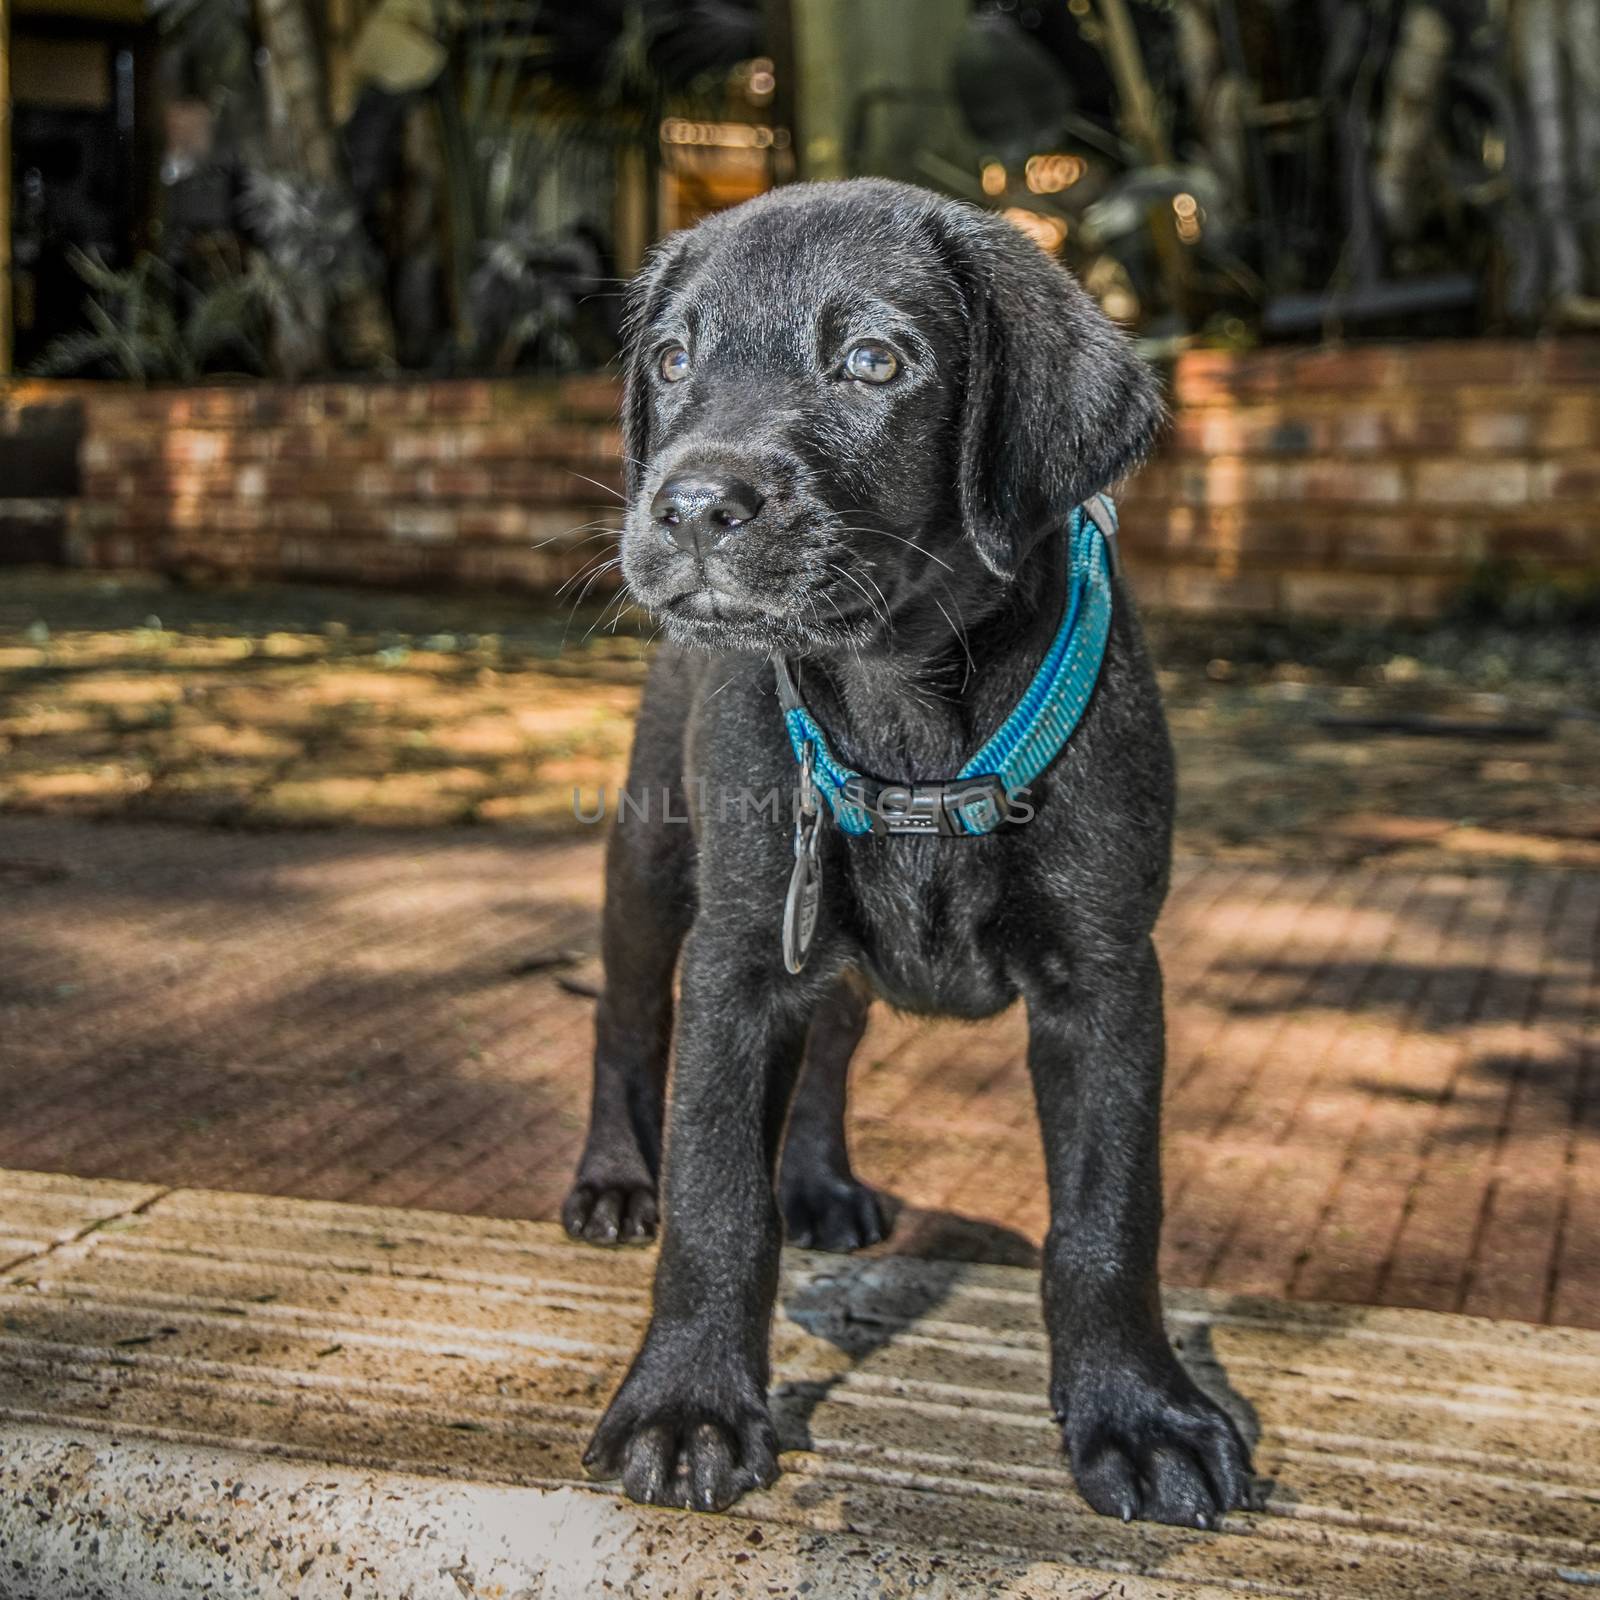 Labrador Puppy playing outside